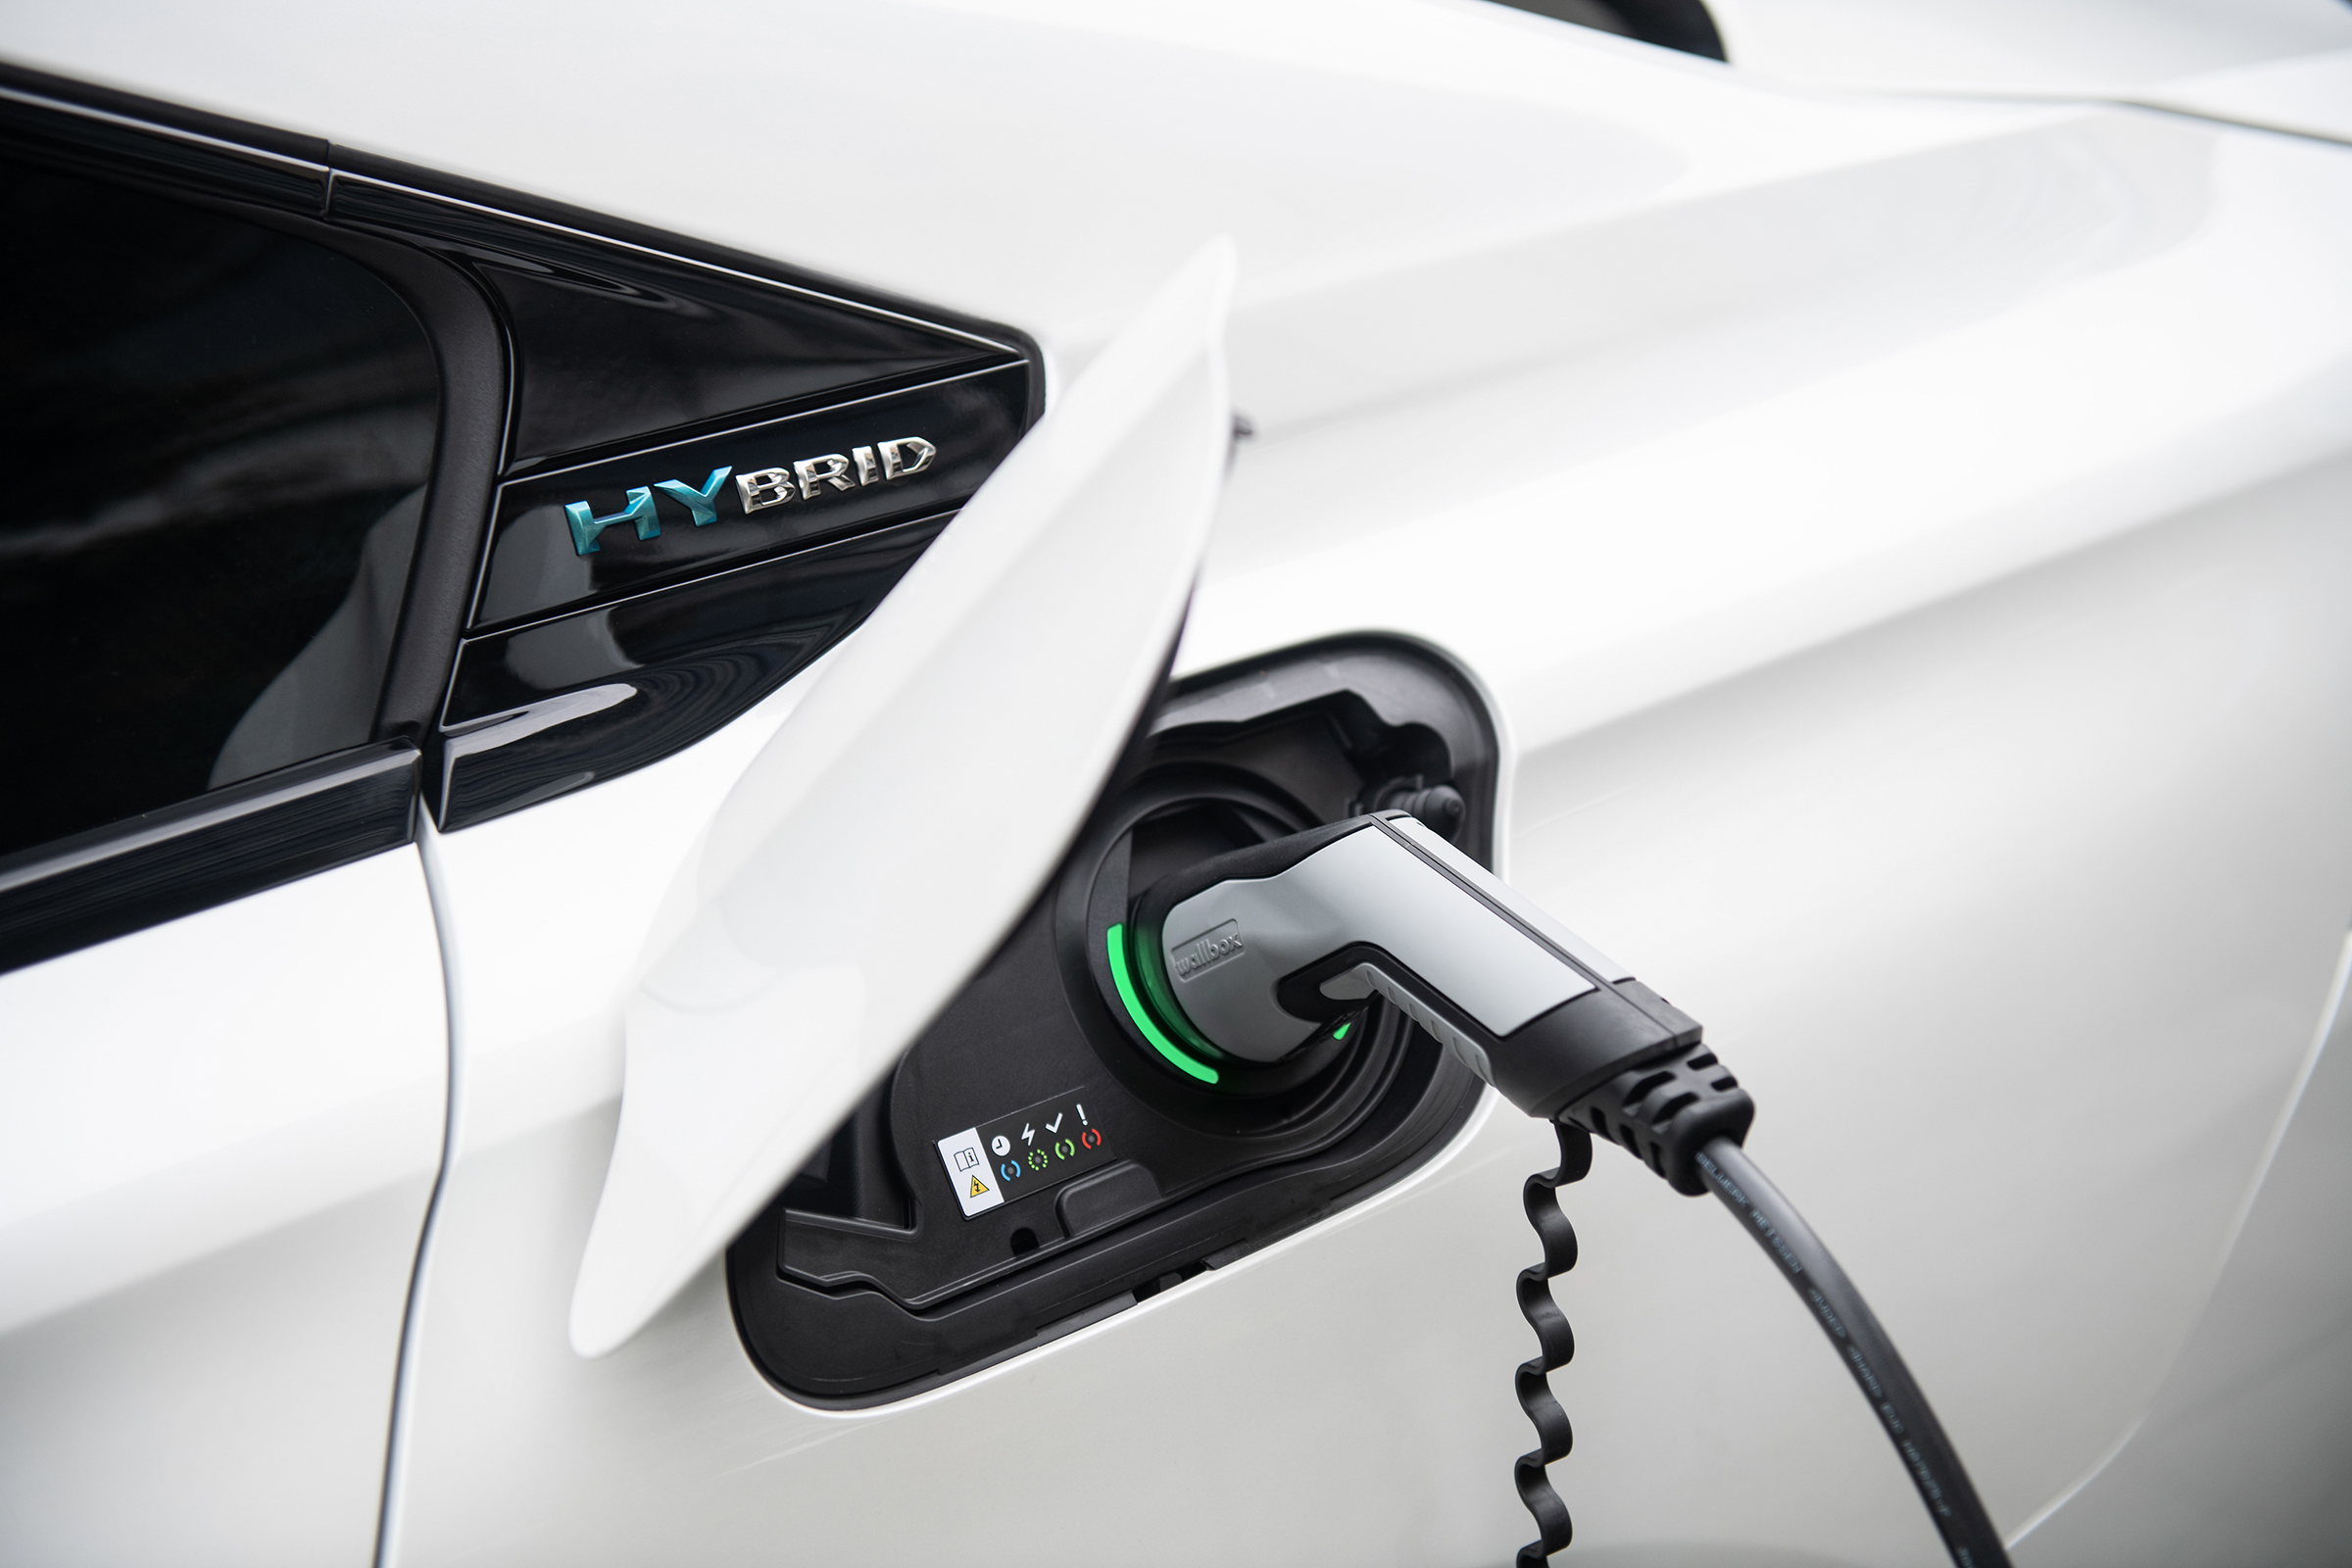 Time to unplug phoney fuel ratings: Australia's "electrified" automotive future isn't all its cracked up to be | Opinion - EV Central